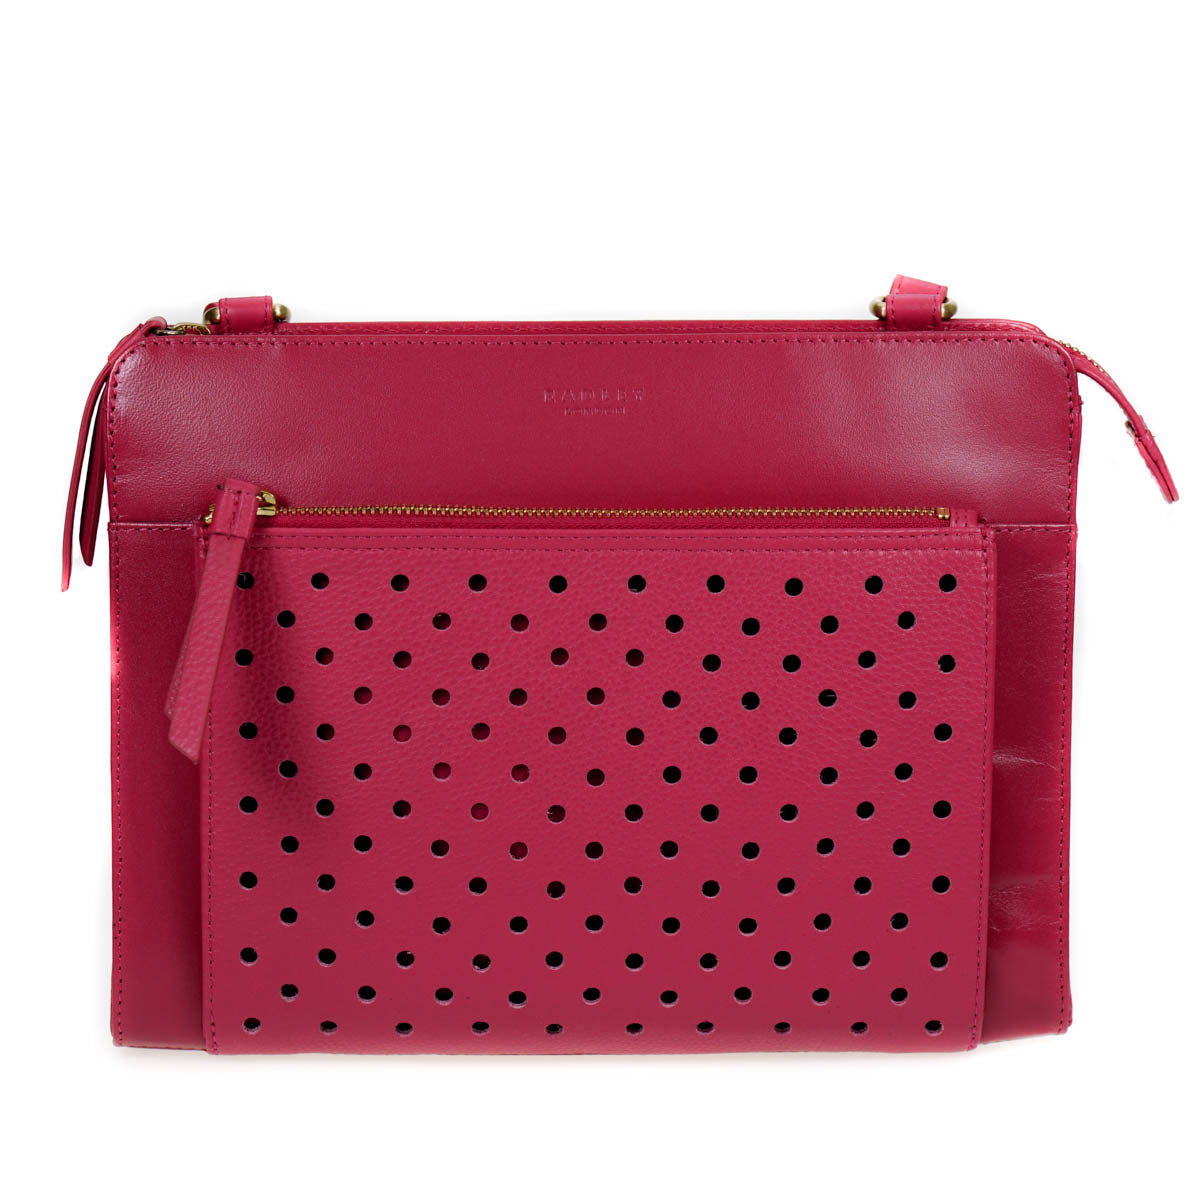 Radley London Get Up and Go Bifold Matinee Purse, Cassis Pink, L :  Amazon.com.au: Clothing, Shoes & Accessories